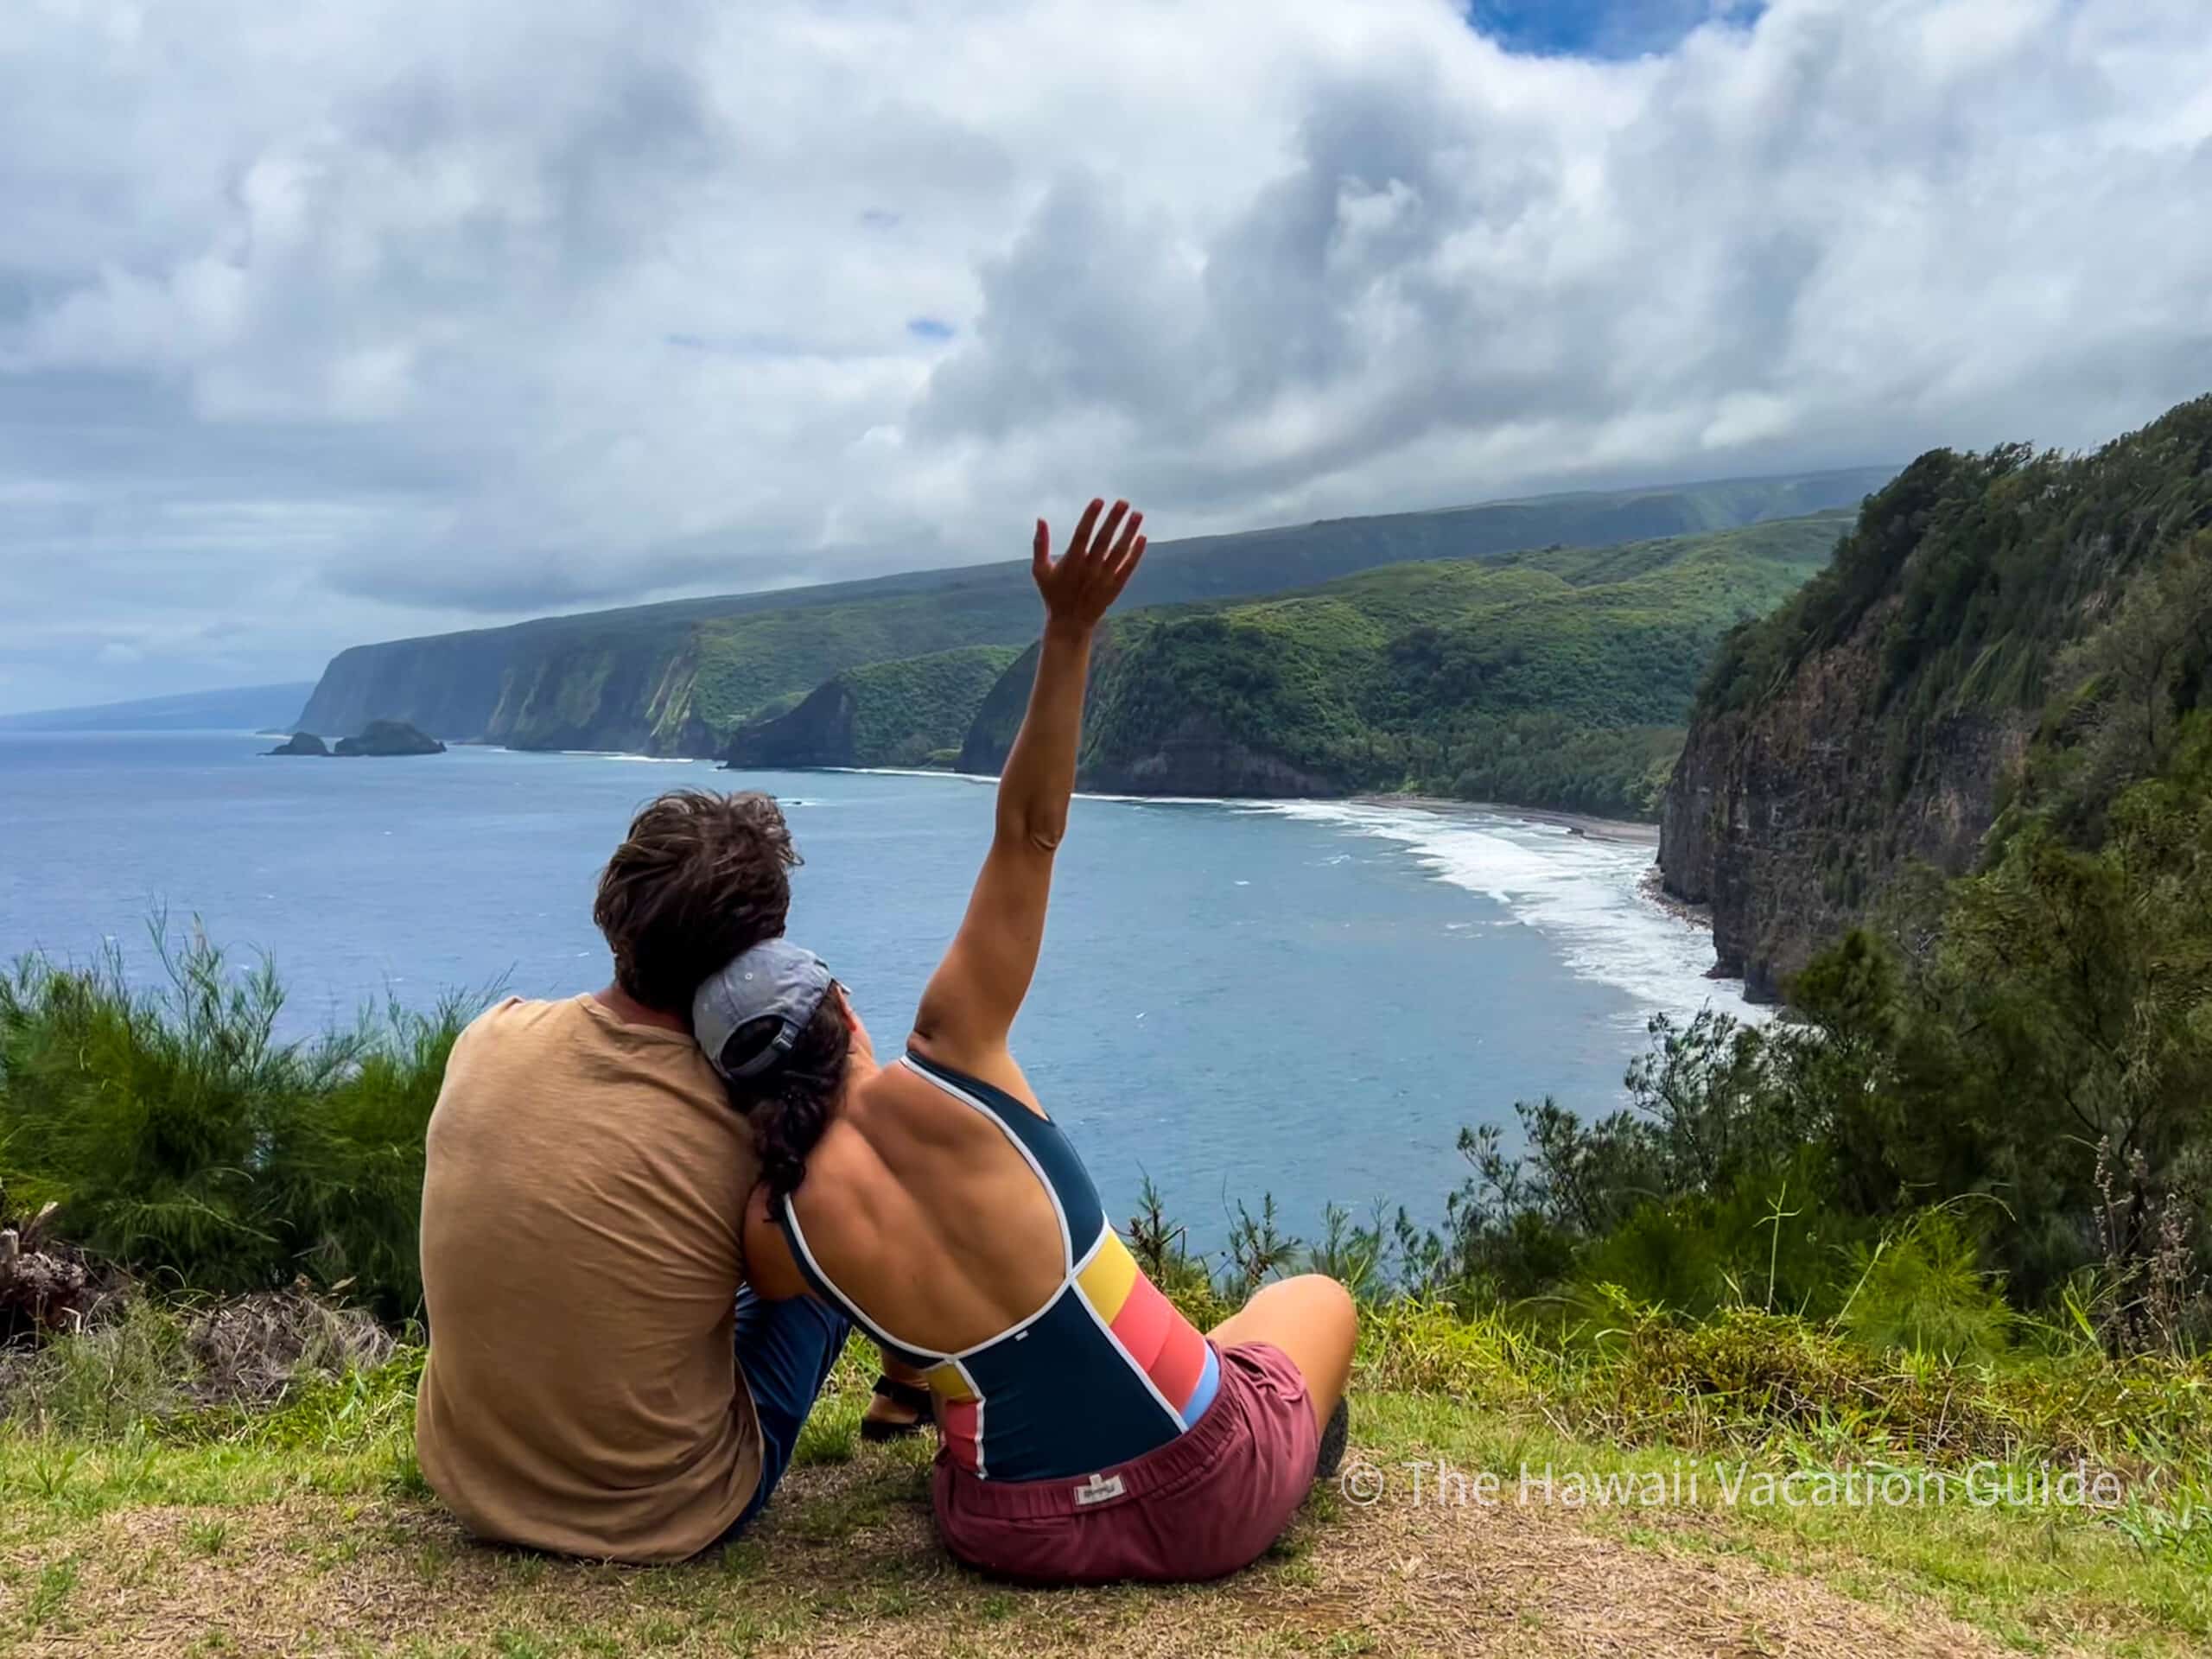 The Best time to visit the Big Island